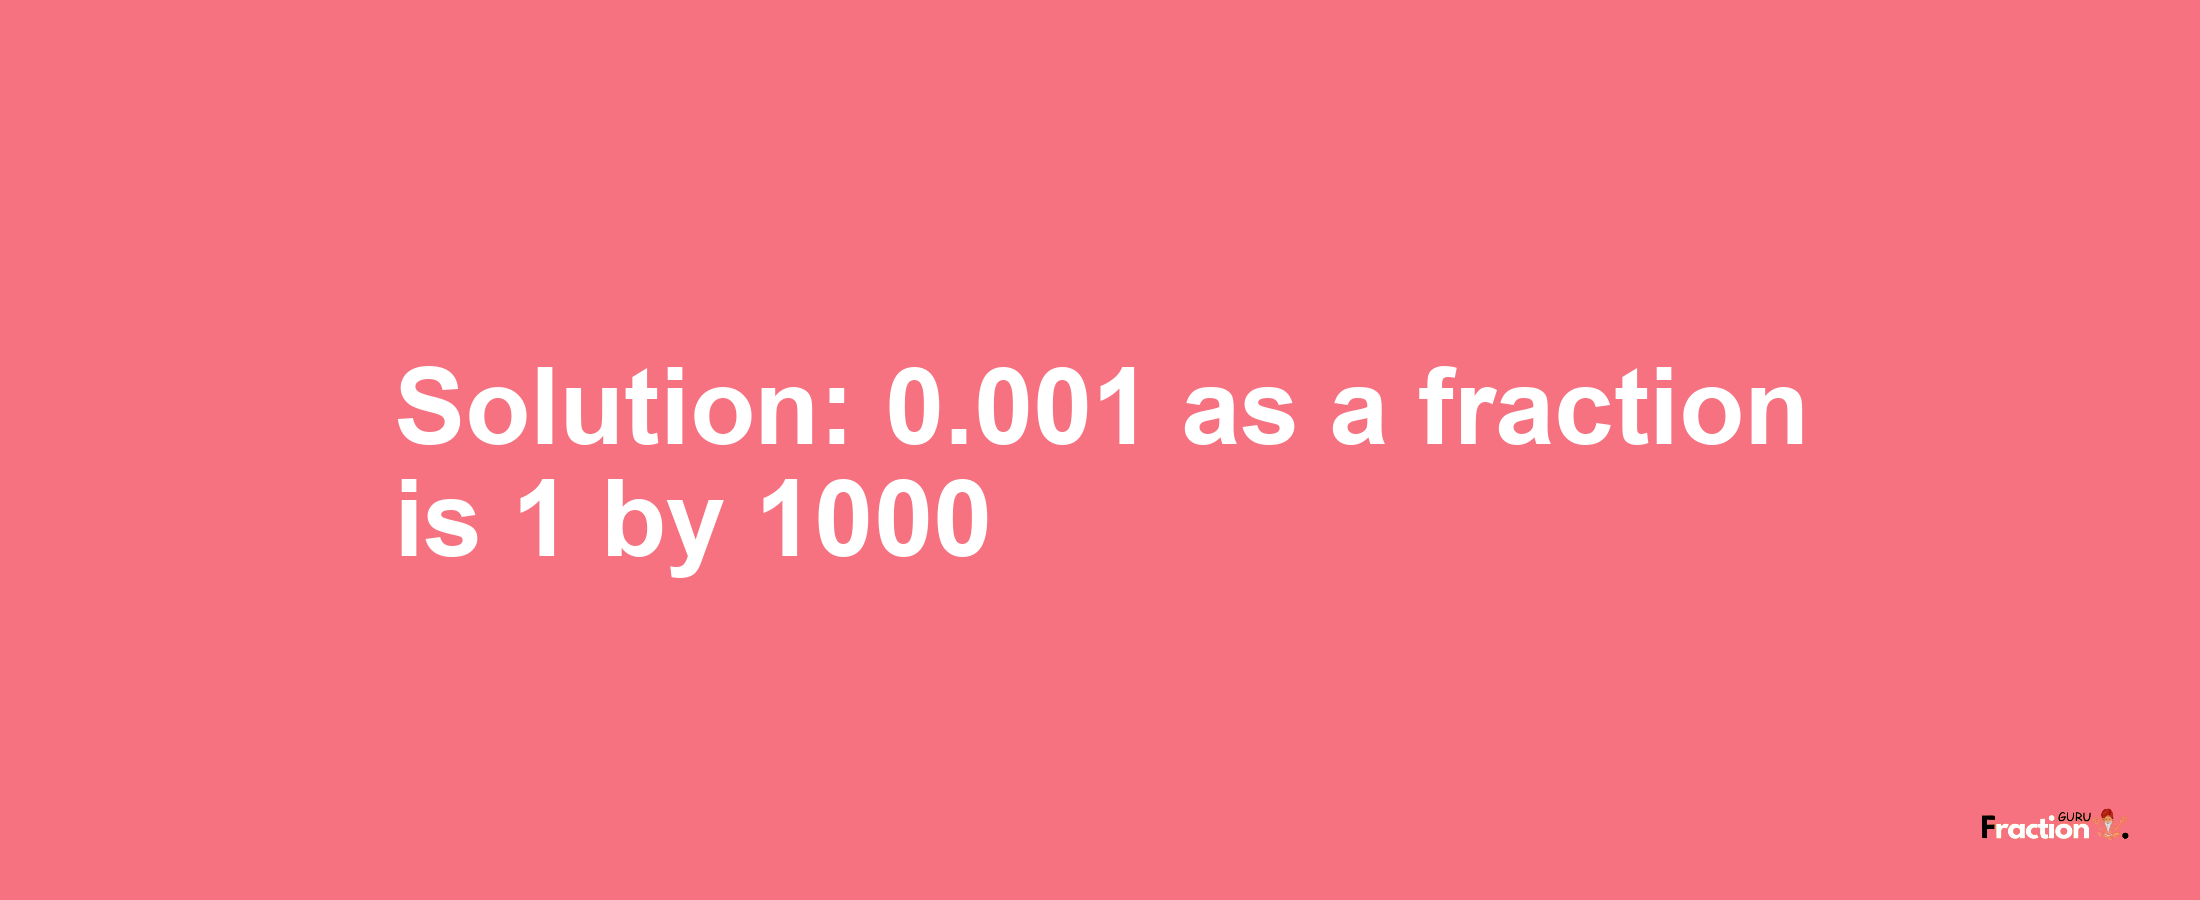 Solution:0.001 as a fraction is 1/1000